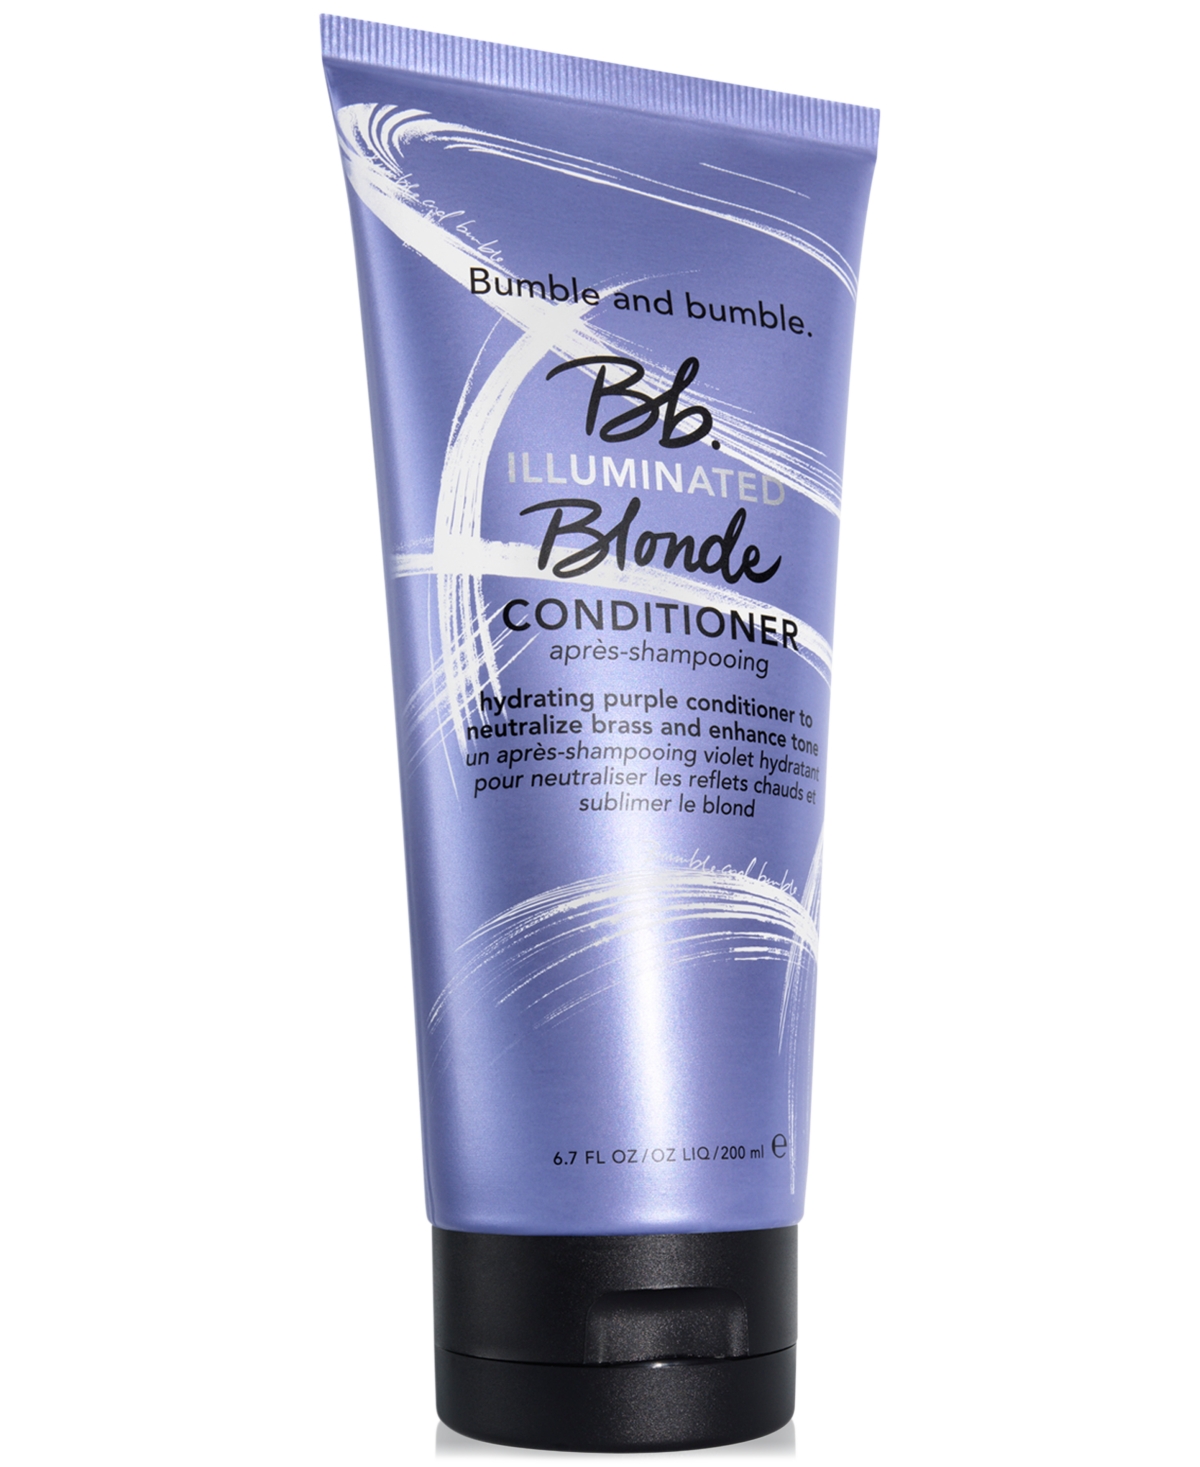 Bumble and Bumble Illuminated Blonde Conditioner, 6.7 oz.